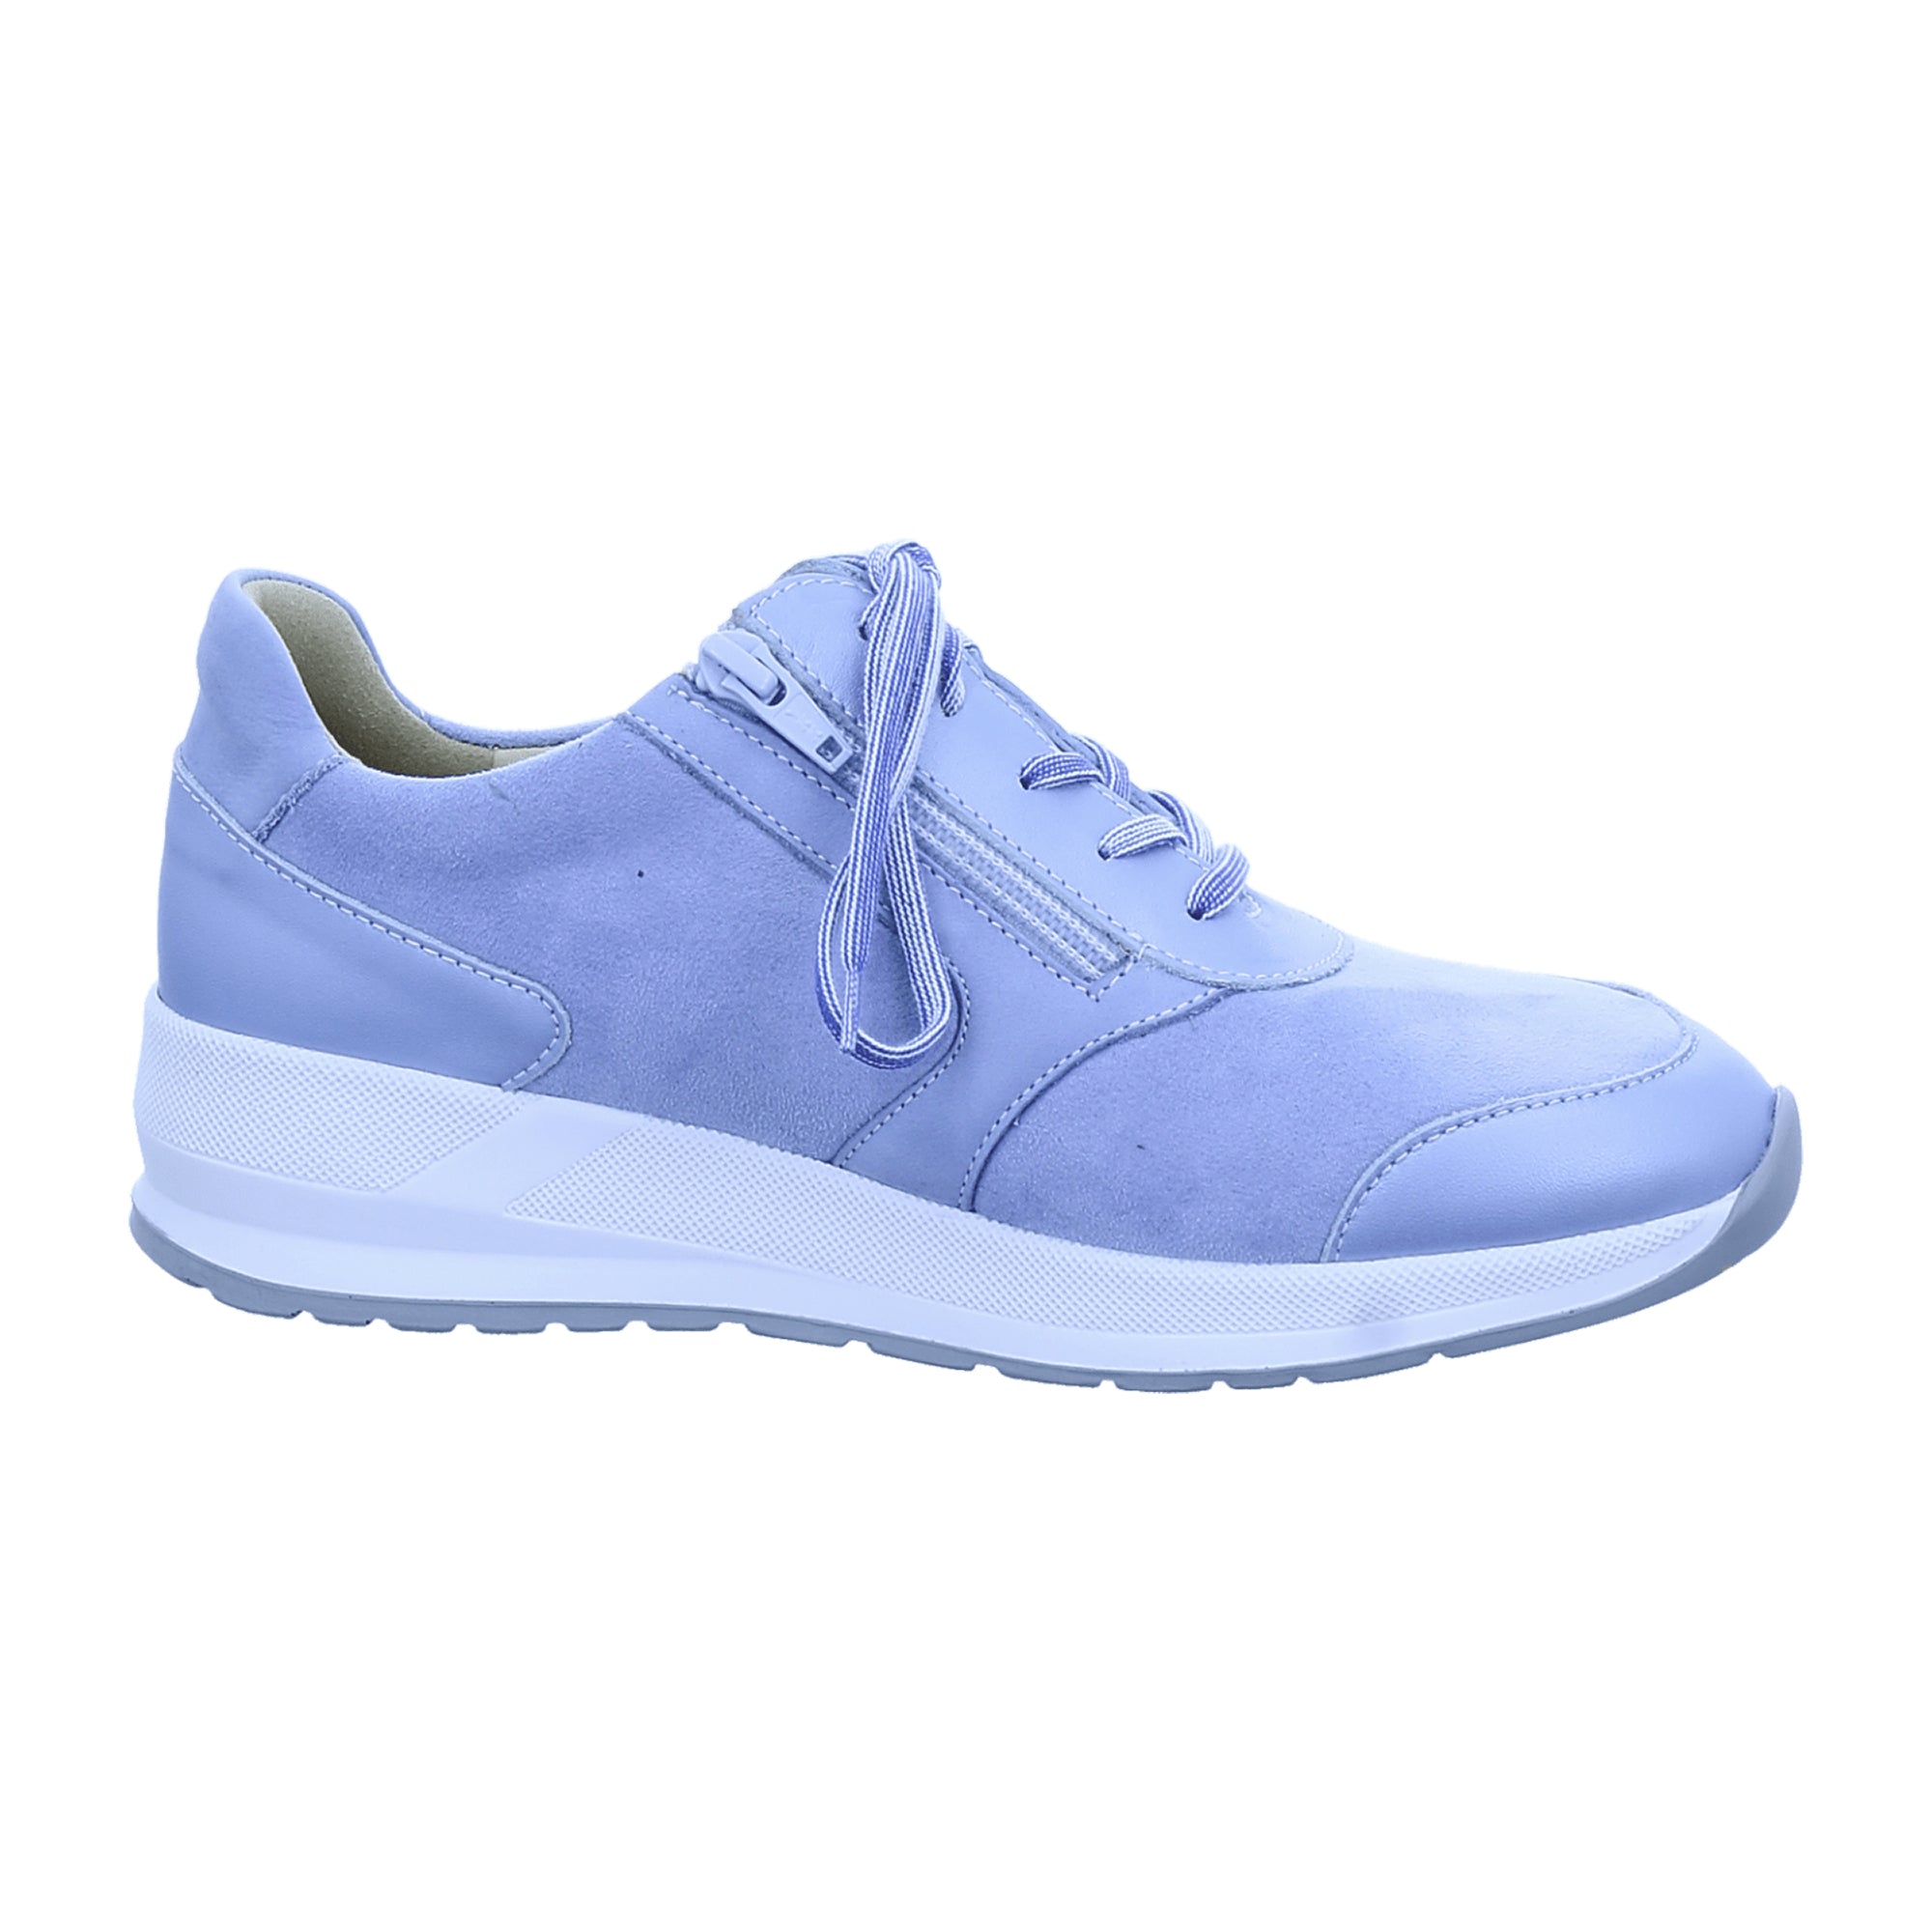 Finn Comfort Mori Sky Blue Lace-Up Shoes with Removable Insole - Comfortable Leather Shoes for Women